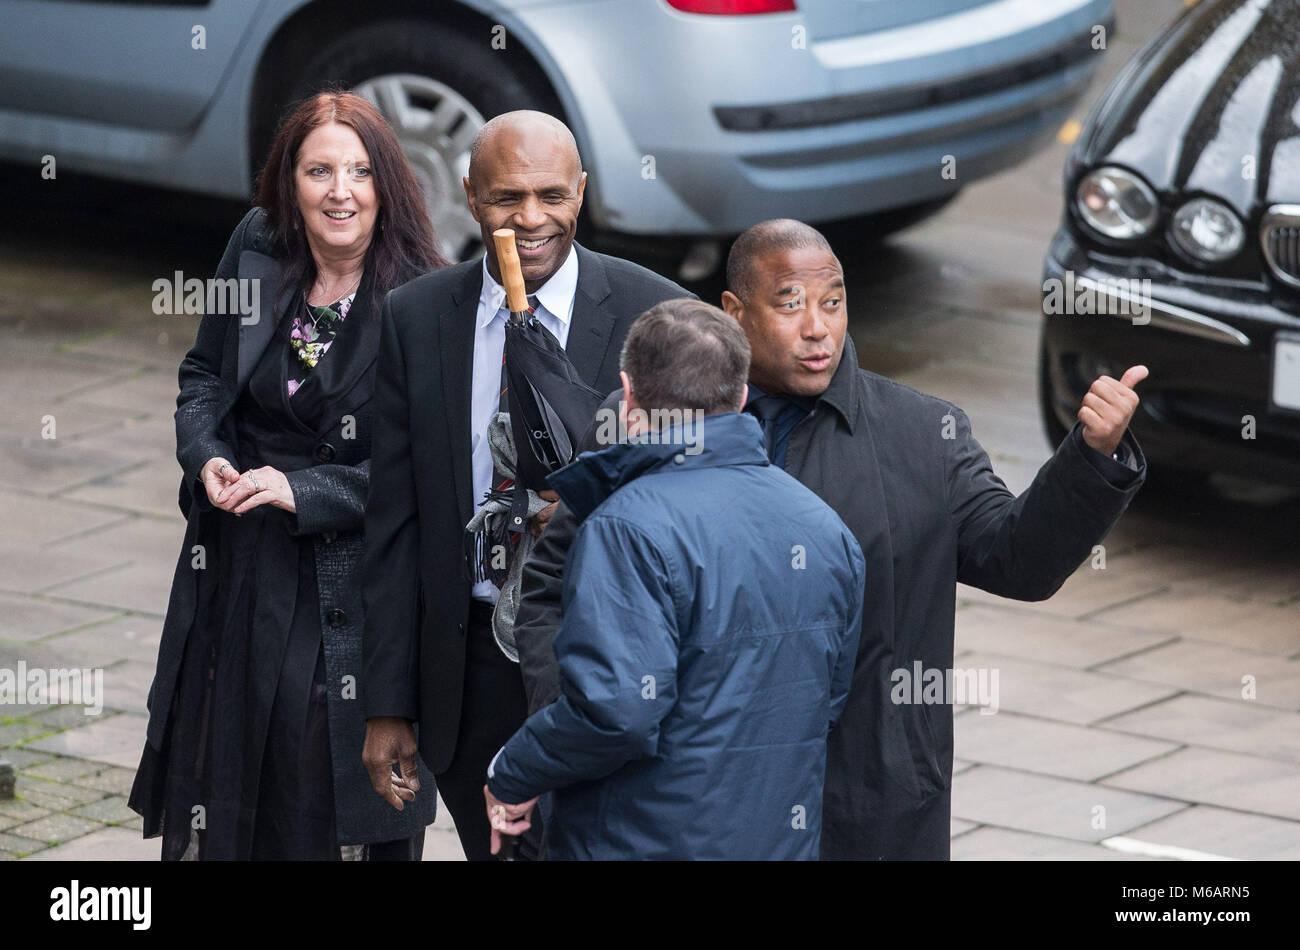 Watford Legends Luther Blissett & John Barnes arrive to the Funeral of Graham Taylor  at St Mary's Church, Church Street, England on 1 February 2017.  Stock Photo